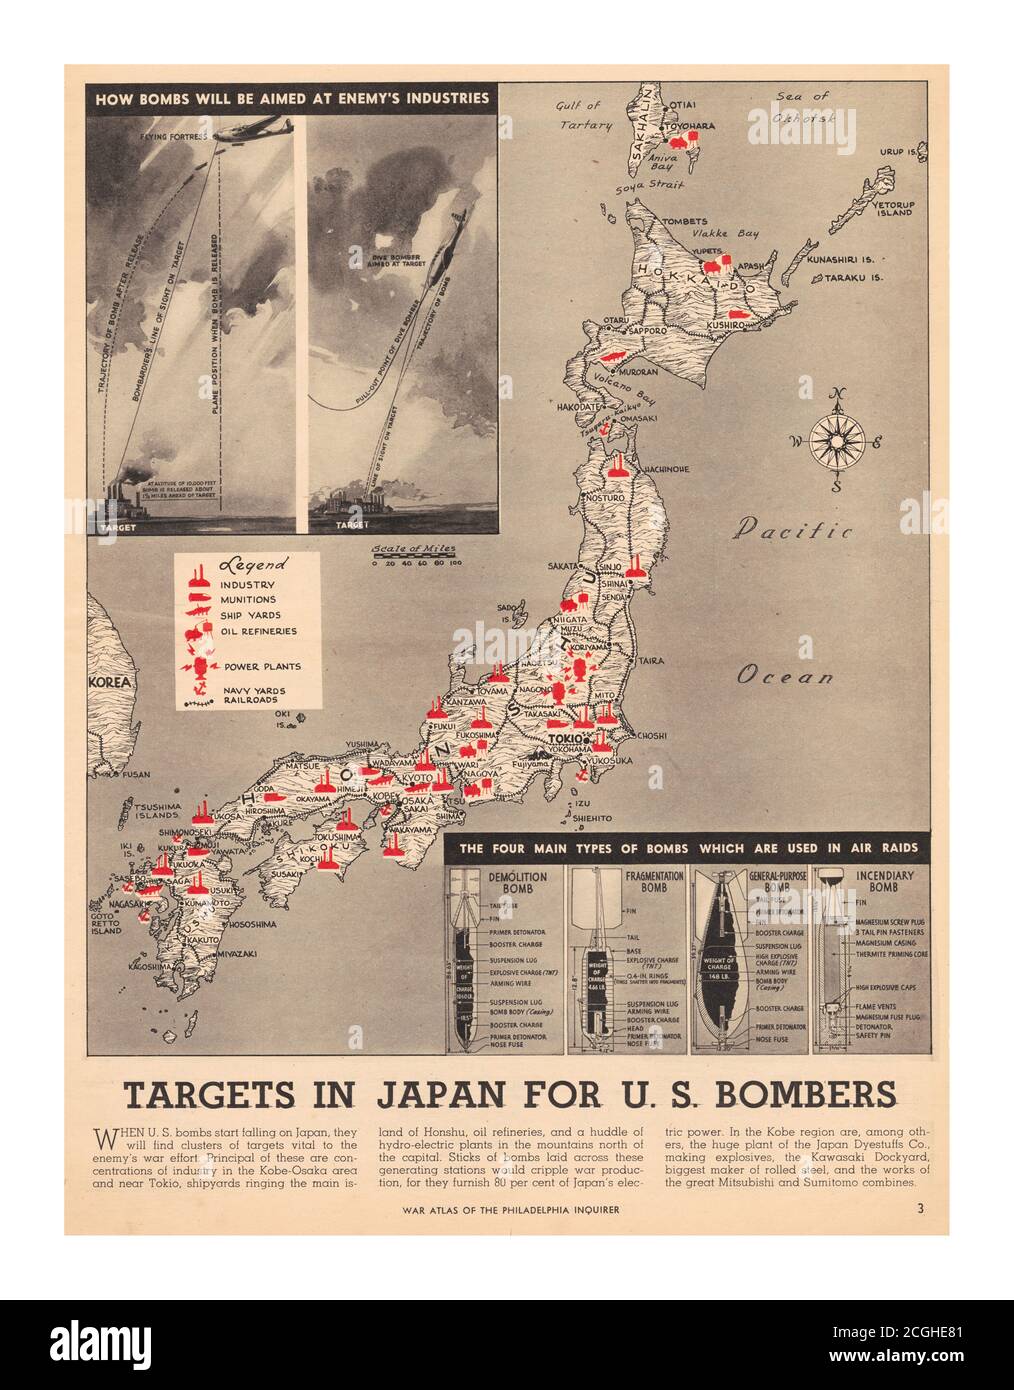 WW2 Propaganda map  from a War Atlas published by the Philadelphia Inquirer weeks after Pearl Harbor, reflecting and supporting the mood of the country. 'When U.S. bombs start falling on Japan, they will find clusters of targets vital to the enemy's war effort.' These targets, colored bright red, do indeed fill the landscape of the Japanese homeland, labeled Industry, Munitions, Ship Yards, etc. In fact, the U.S. was more than a year away from even the Doolittle Raid on Tokyo, which boosted American morale but had virtually no impact on the Japanese war effort. U.S. bombs did not start 'fallin Stock Photo